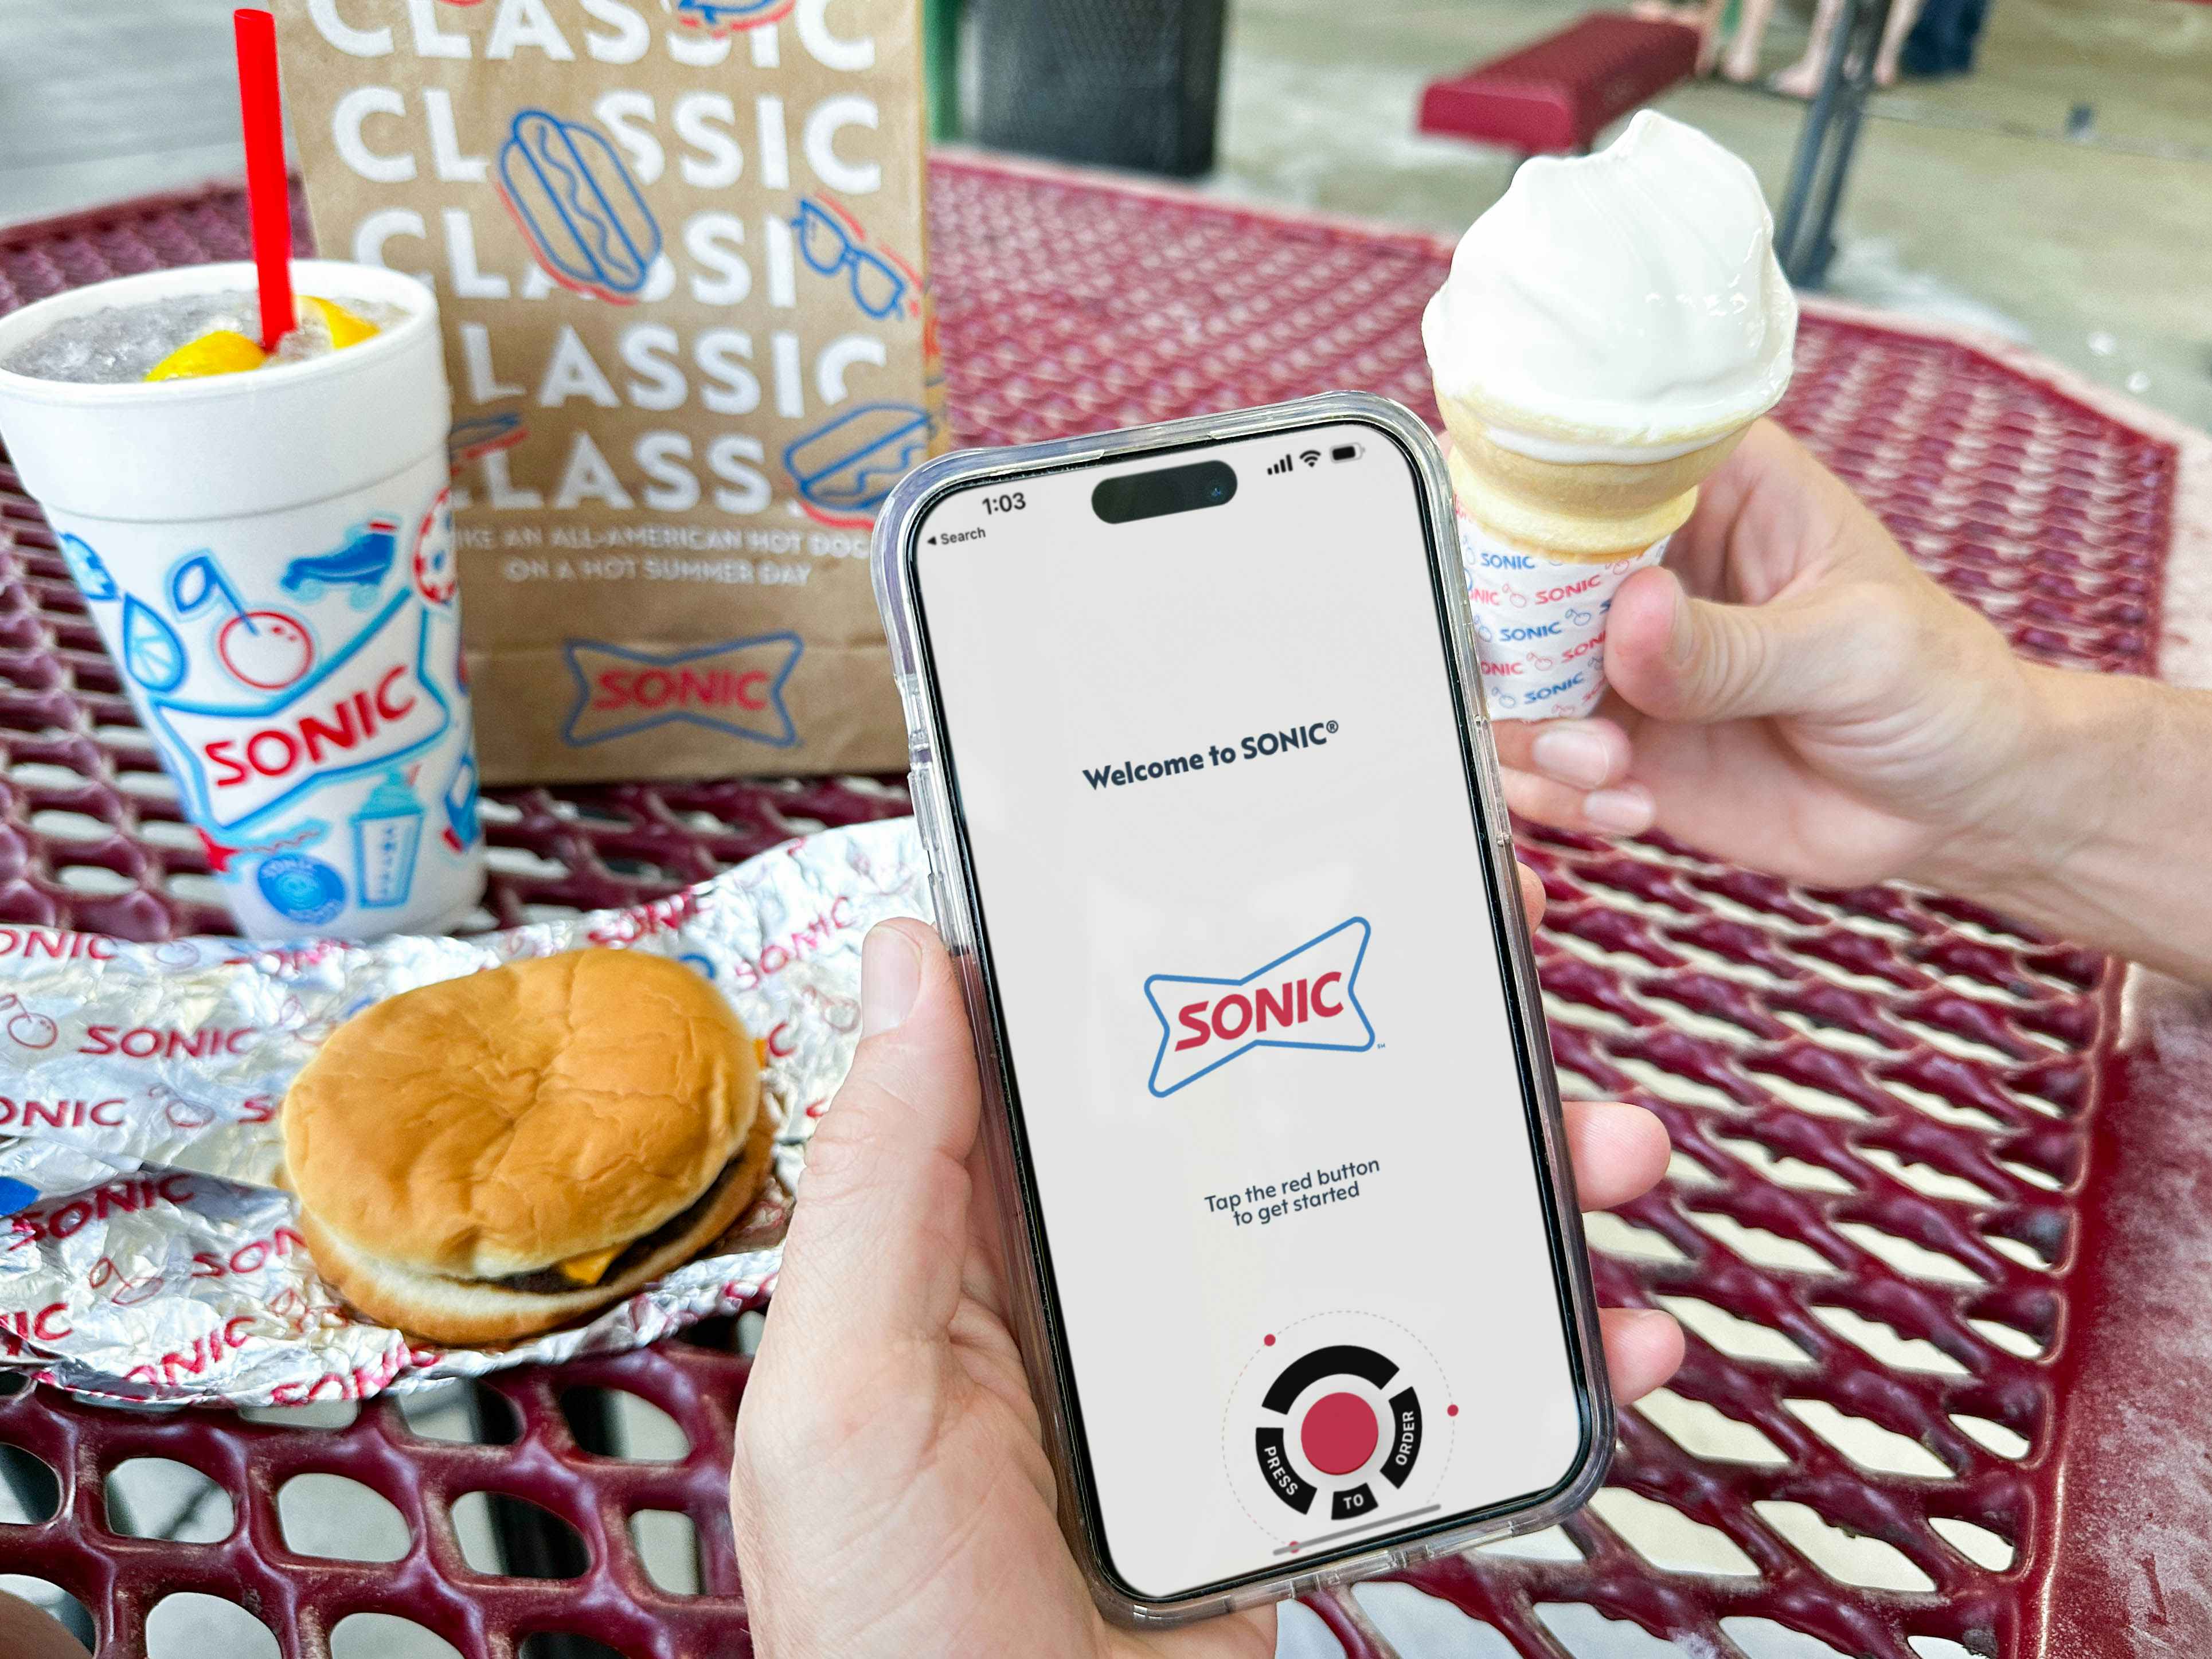 a person holding sonic food while on phone with sonic app